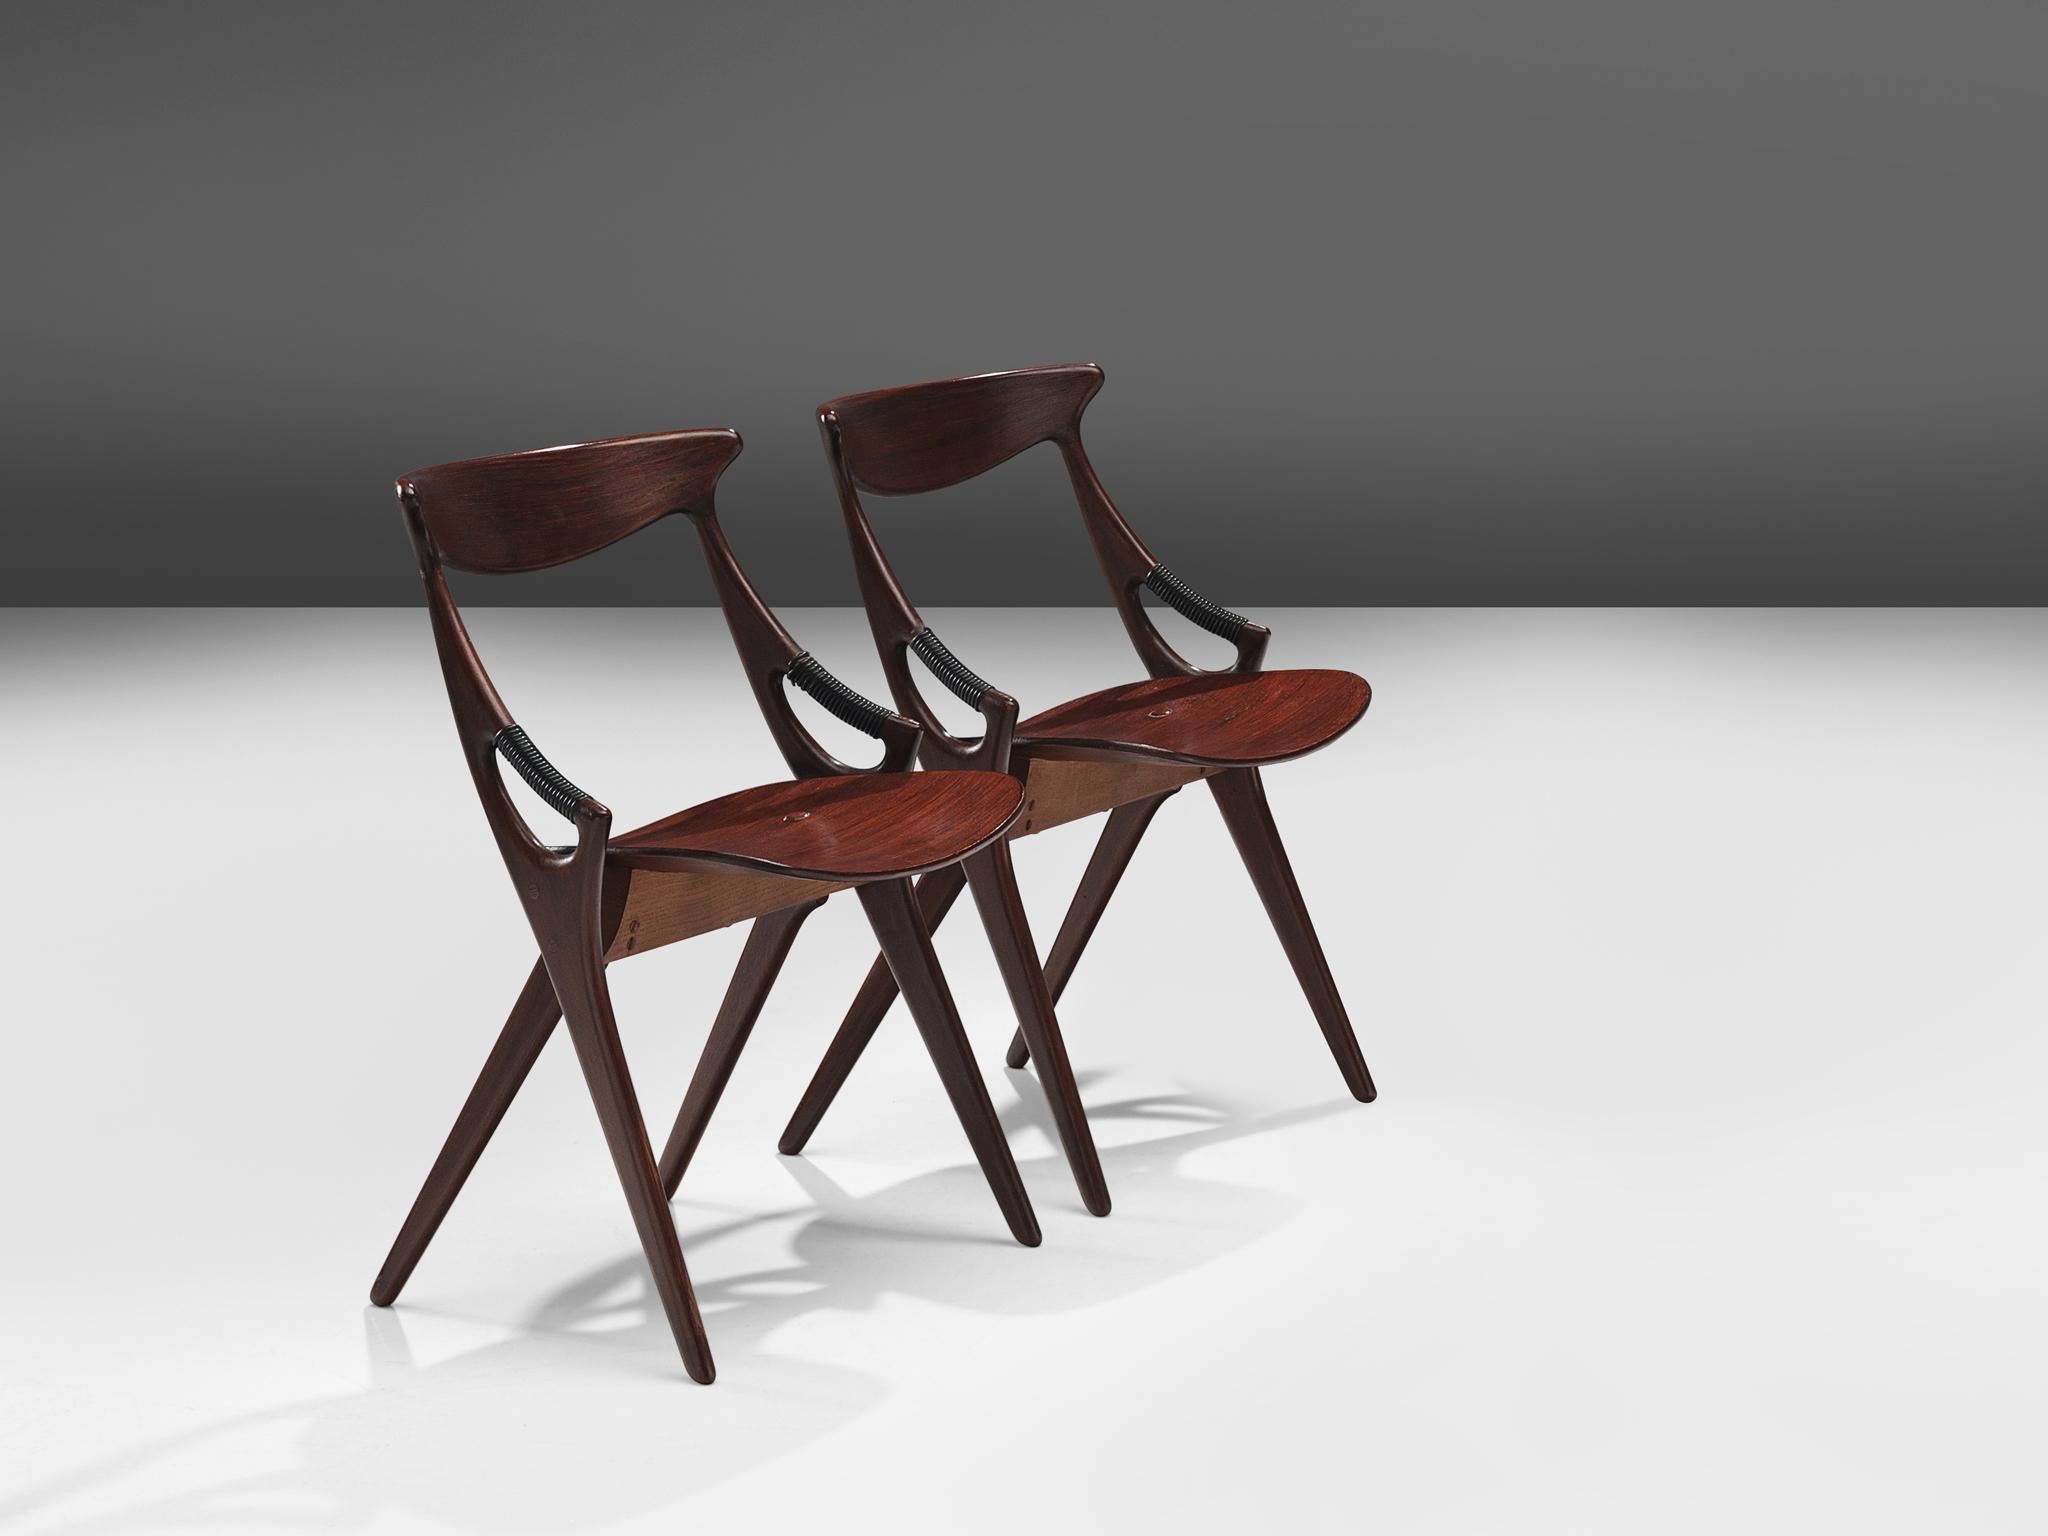 Arne Hovmand-Olsen for Mogens Kold Møbelfabrik, dining chairs model 71, teak, Denmark, 1959

These sculptural dining chairs are designed by the Dane Arne Hovmand-Olsen for Mogens Kold Møbelfabrik. The chair is organically shaped as can be seen in